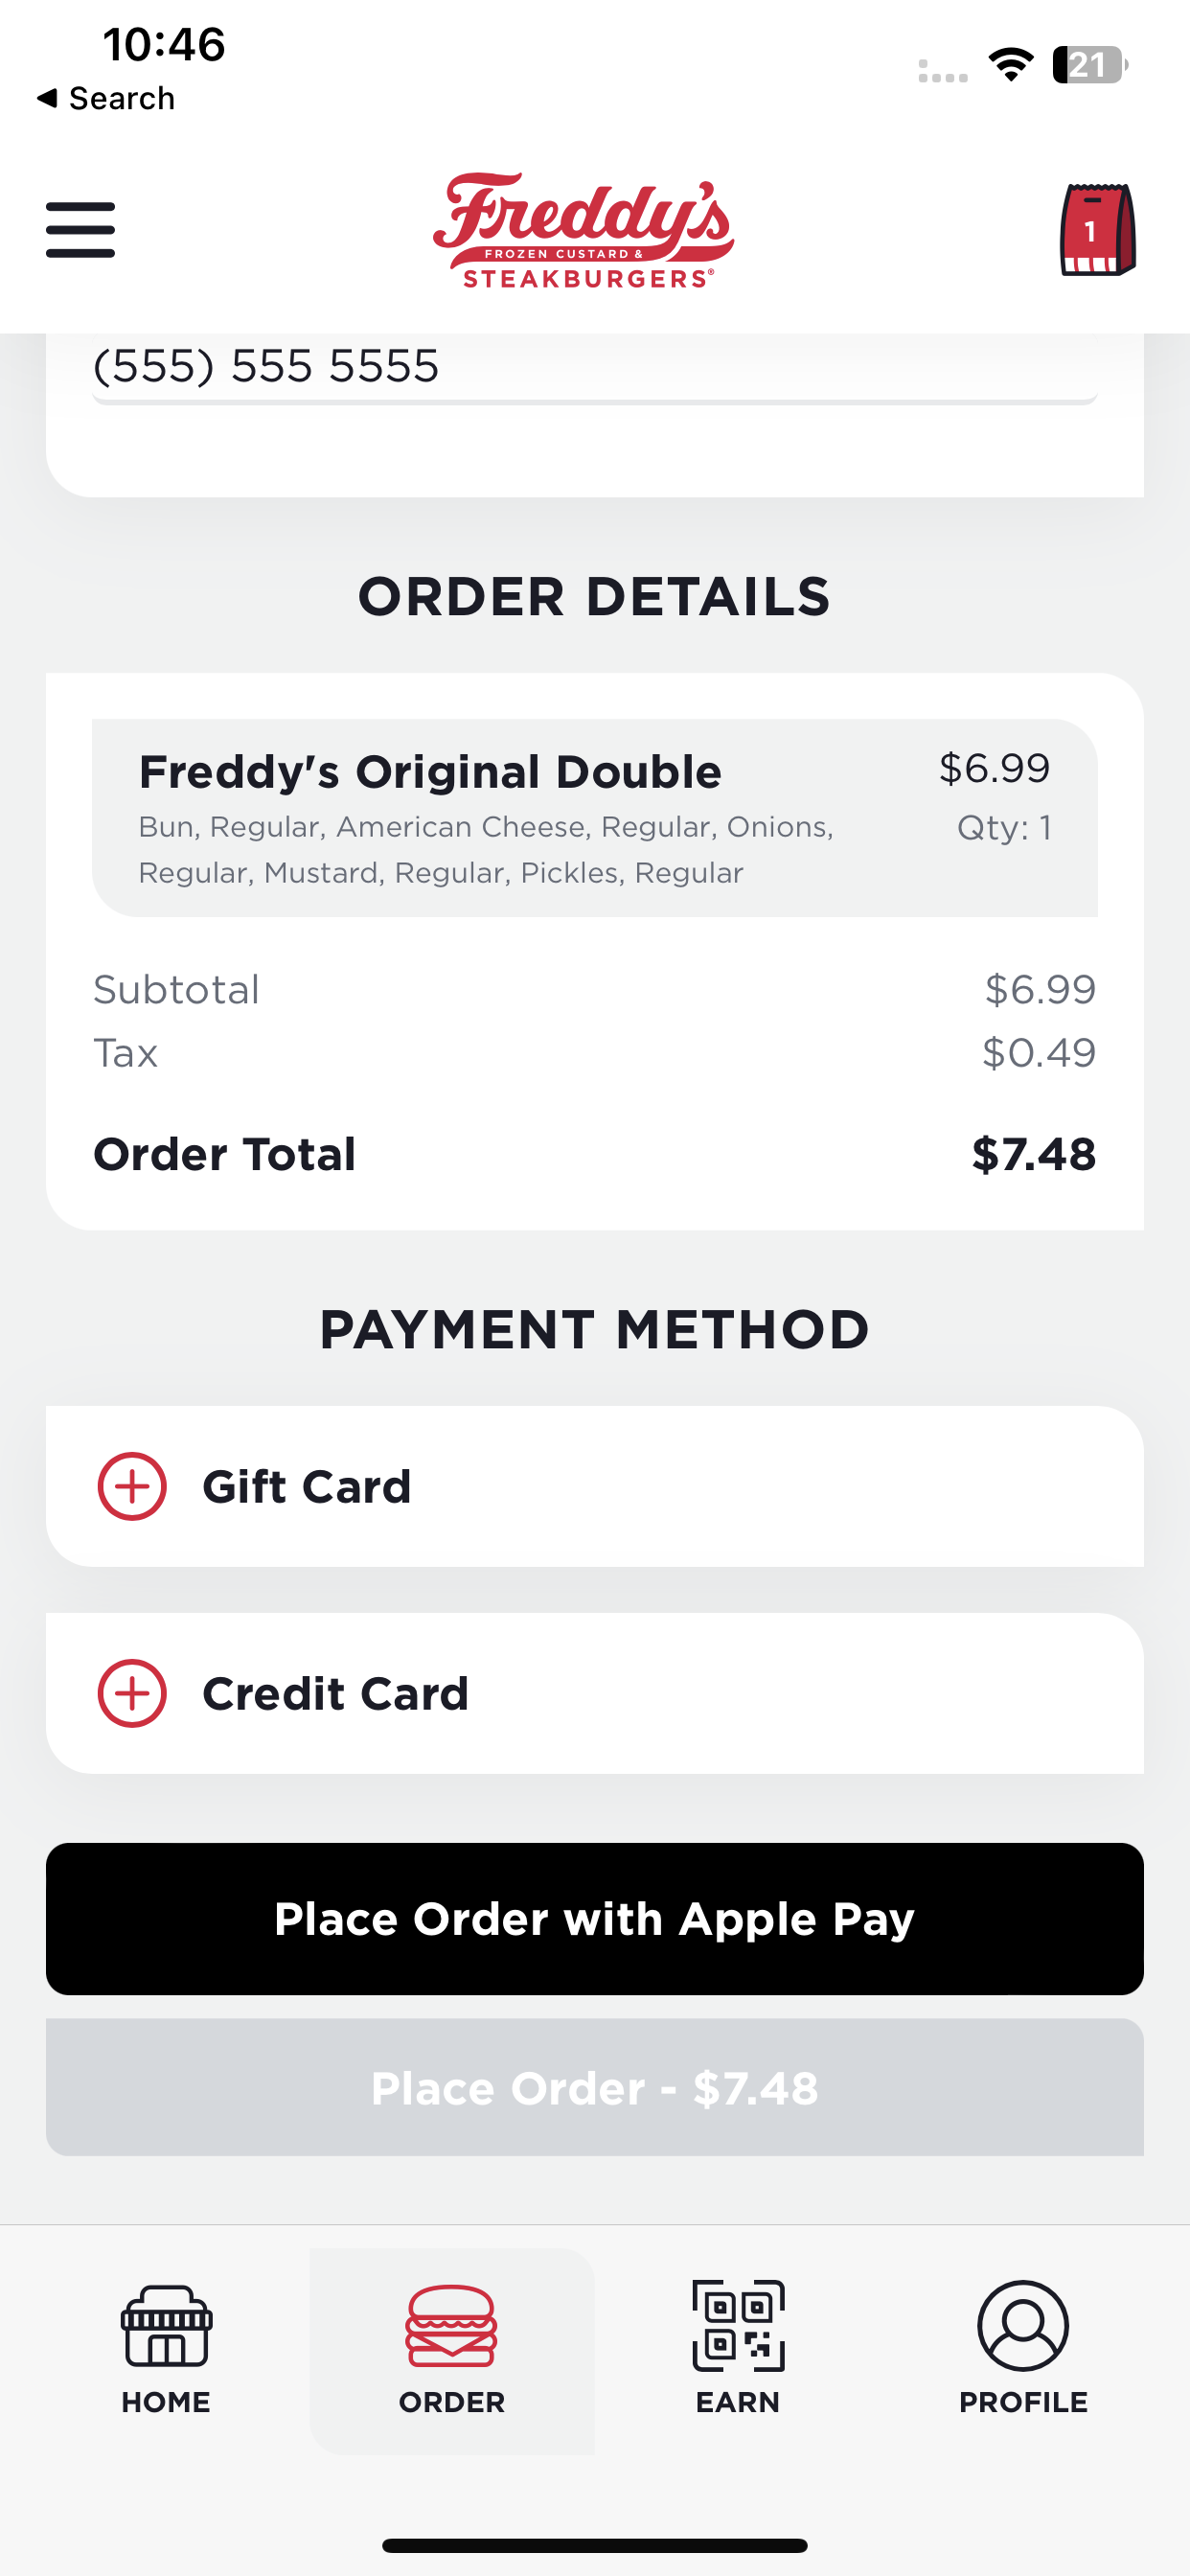 Freddy's accepts Apple Pay in its app.